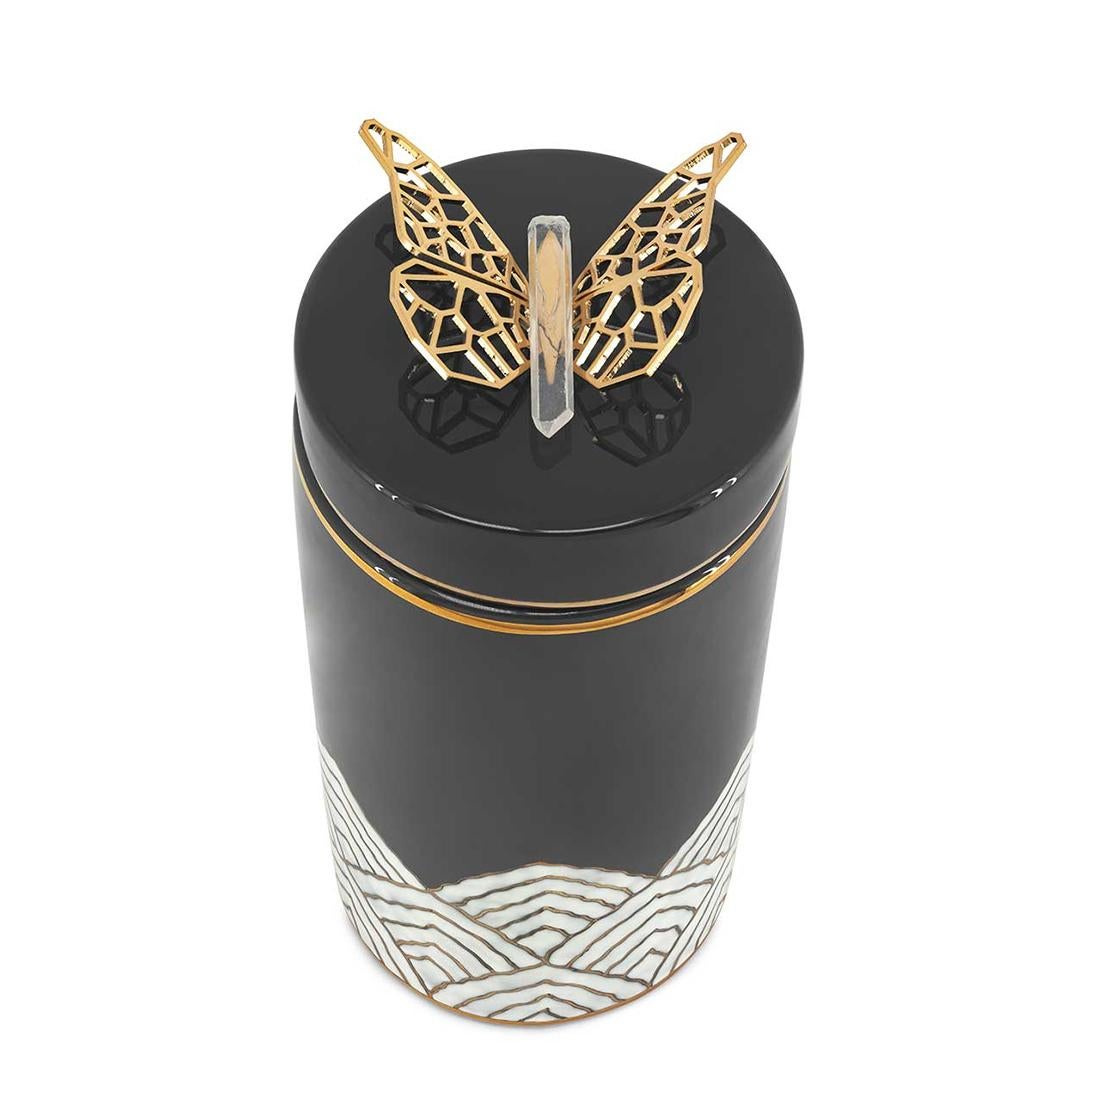 Box butterfly in glazed ceramic in black
finish. With white glazed ceramic at the
bottom with gilded trim. Box with lid with
polished brass butterfly on lid's top.